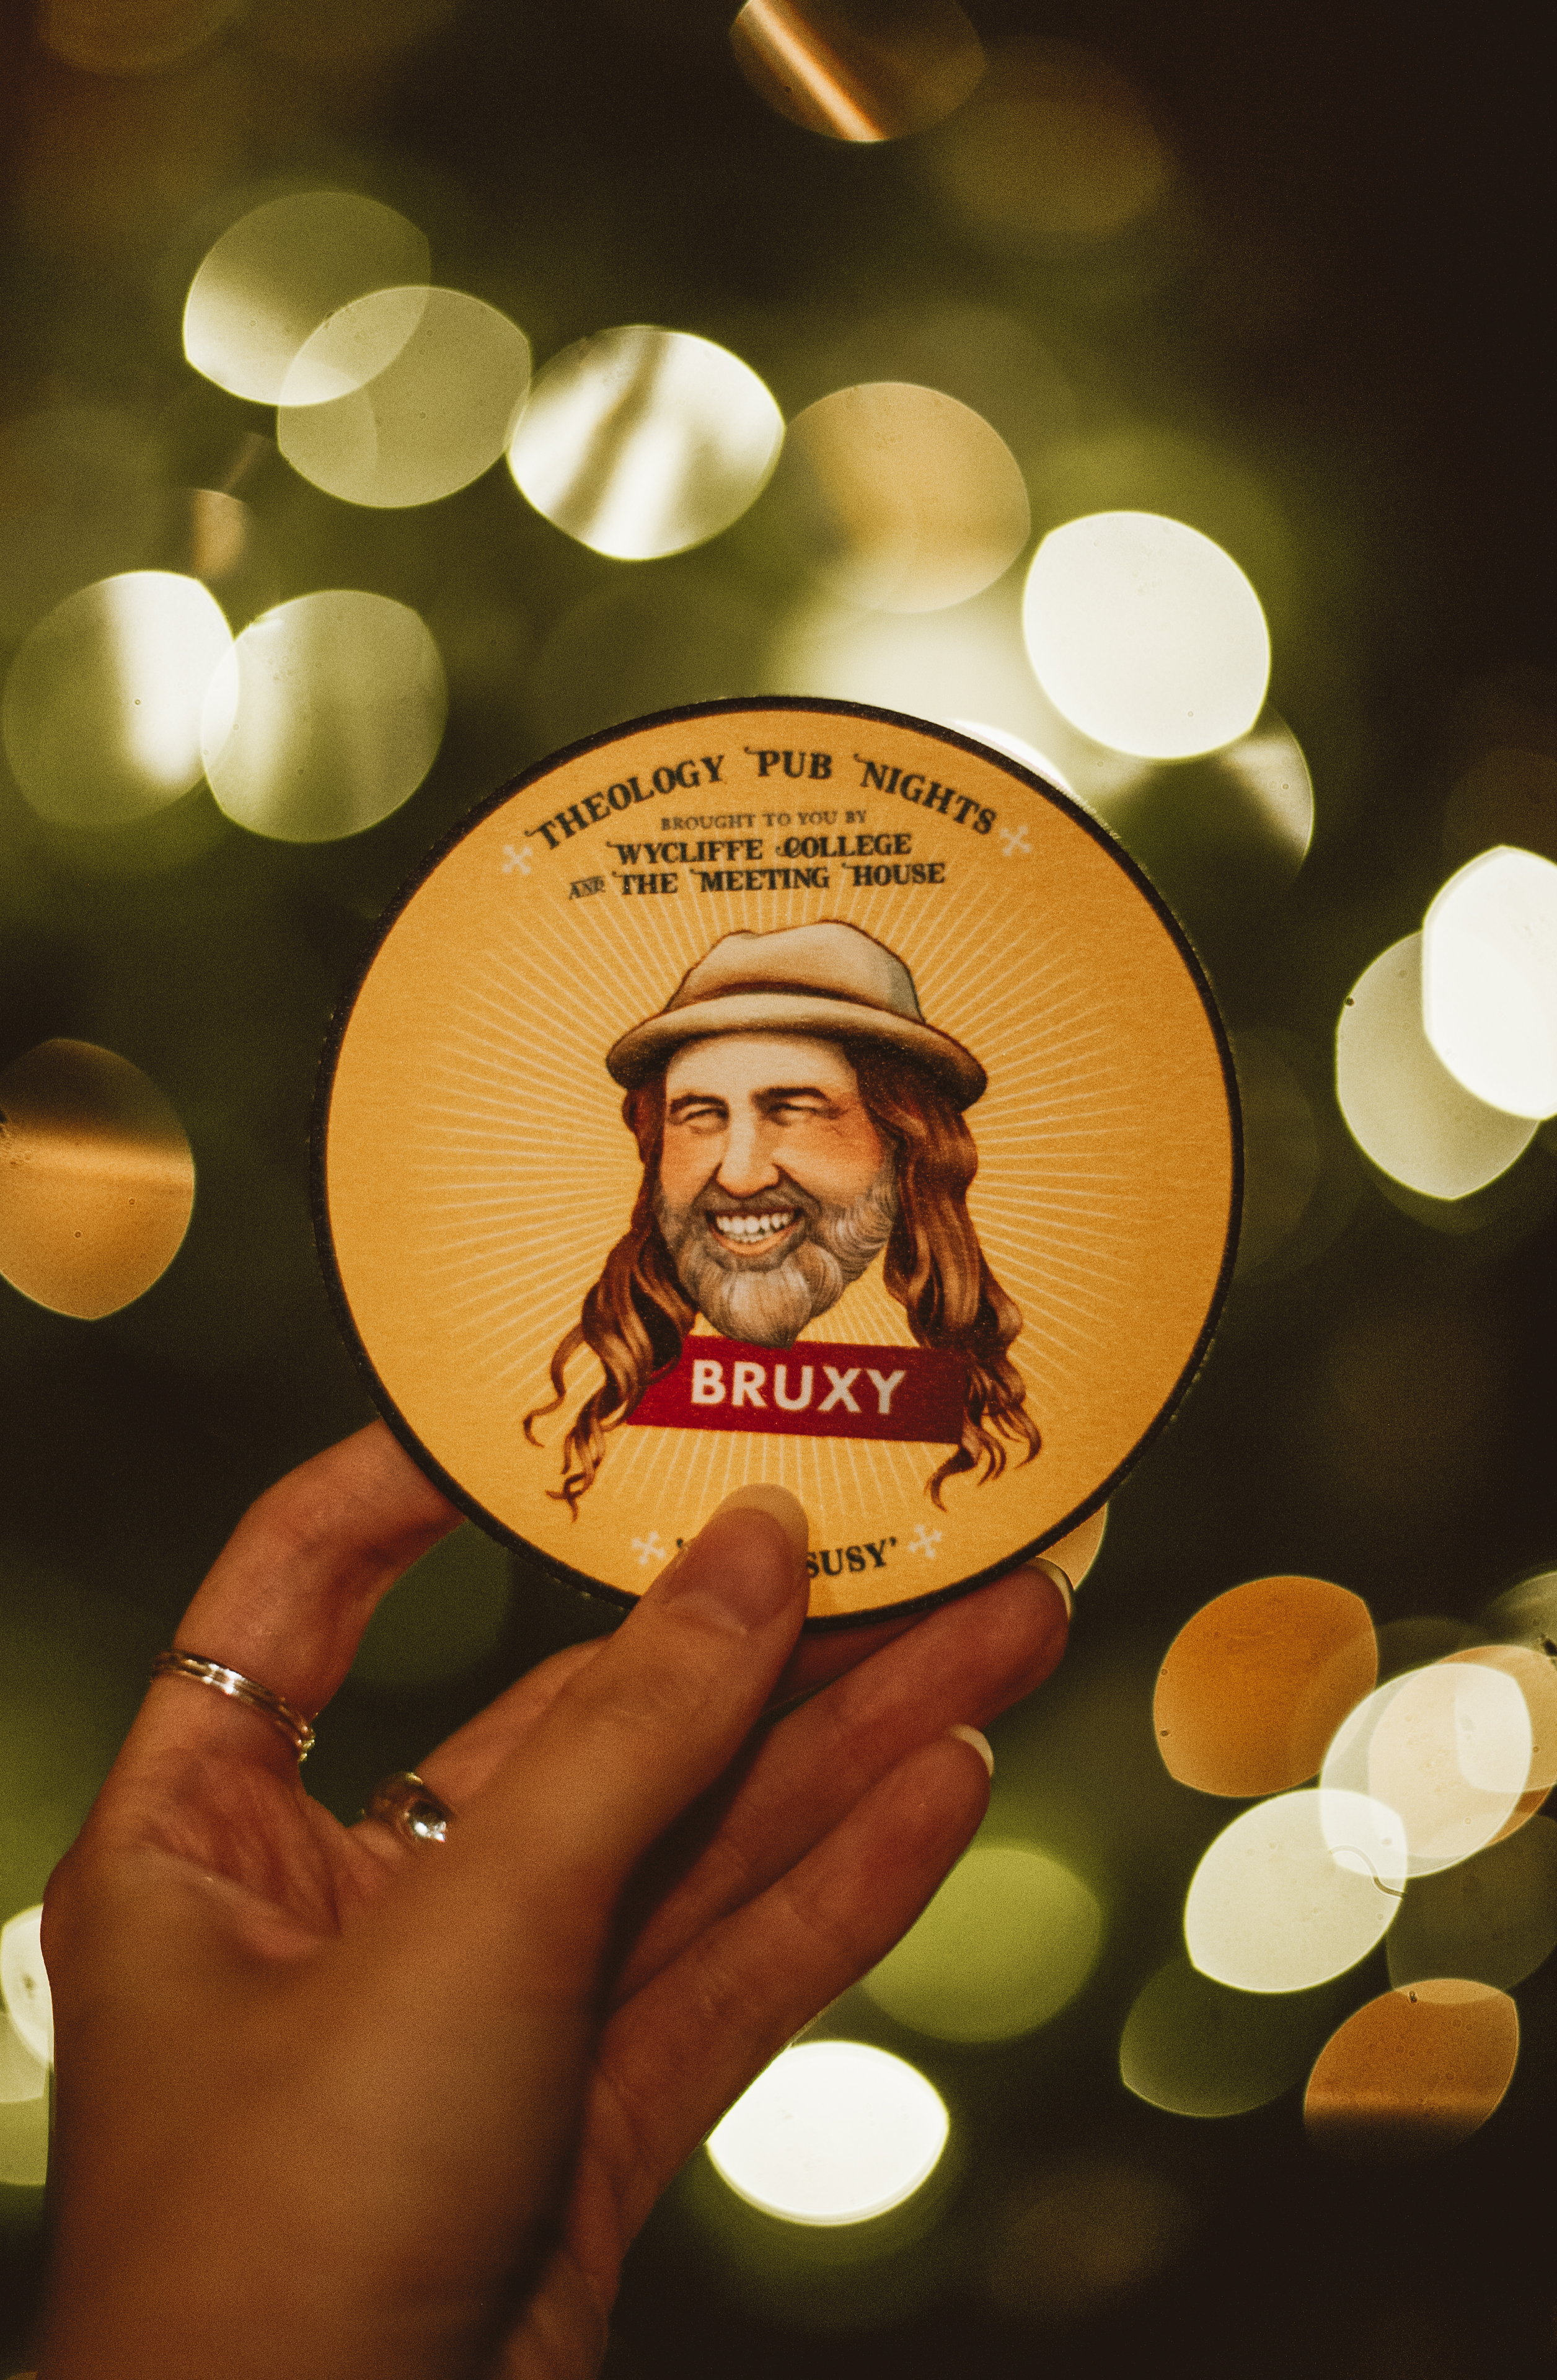 A coaster with an illustration of Bruxy Cavey